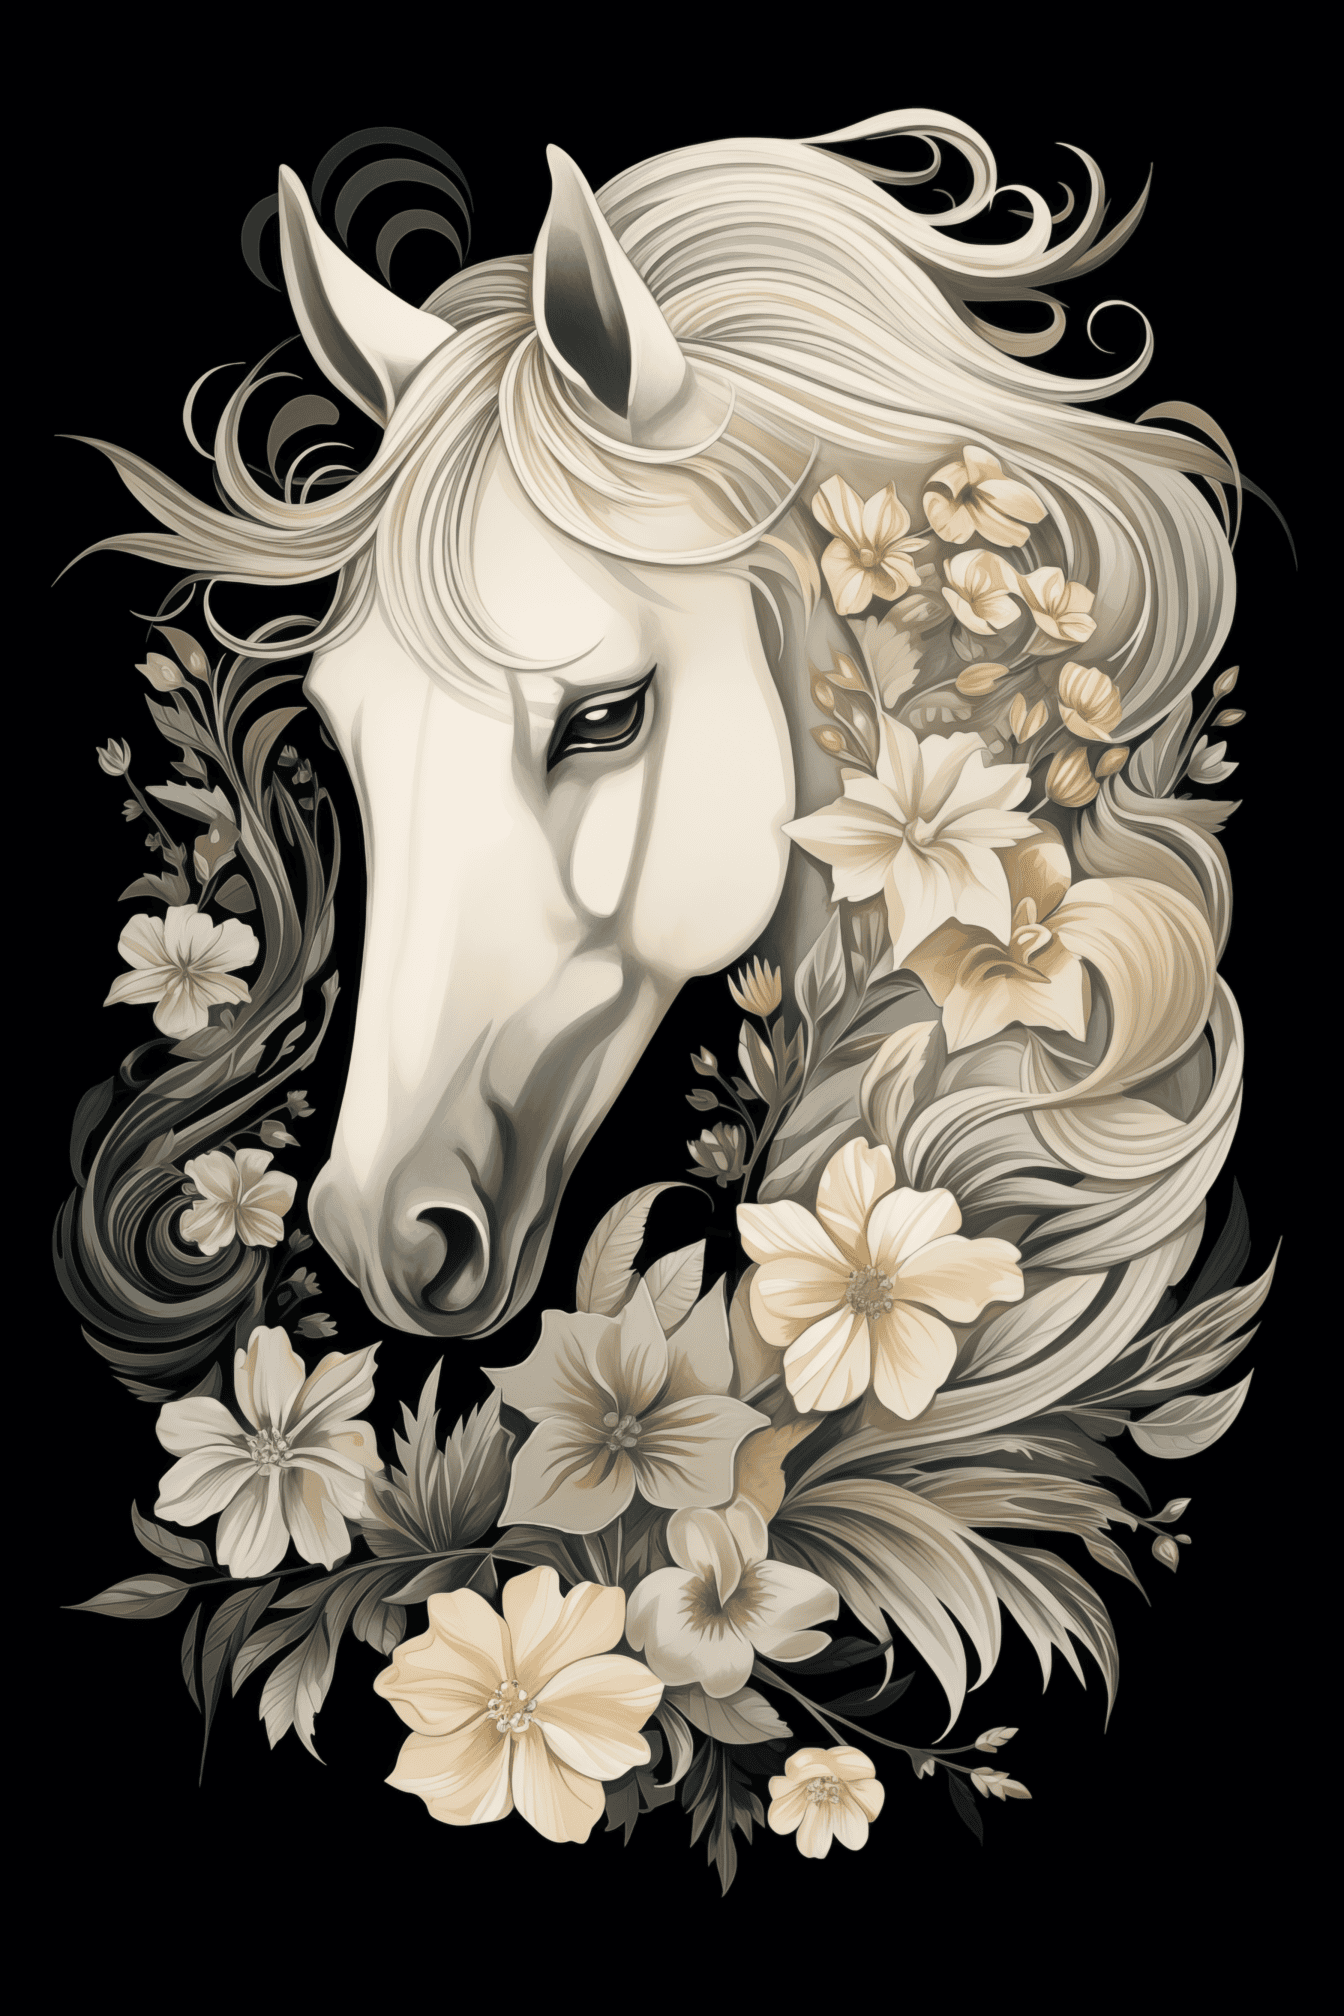 Black and white illustration of a head of white horse with flower decorations